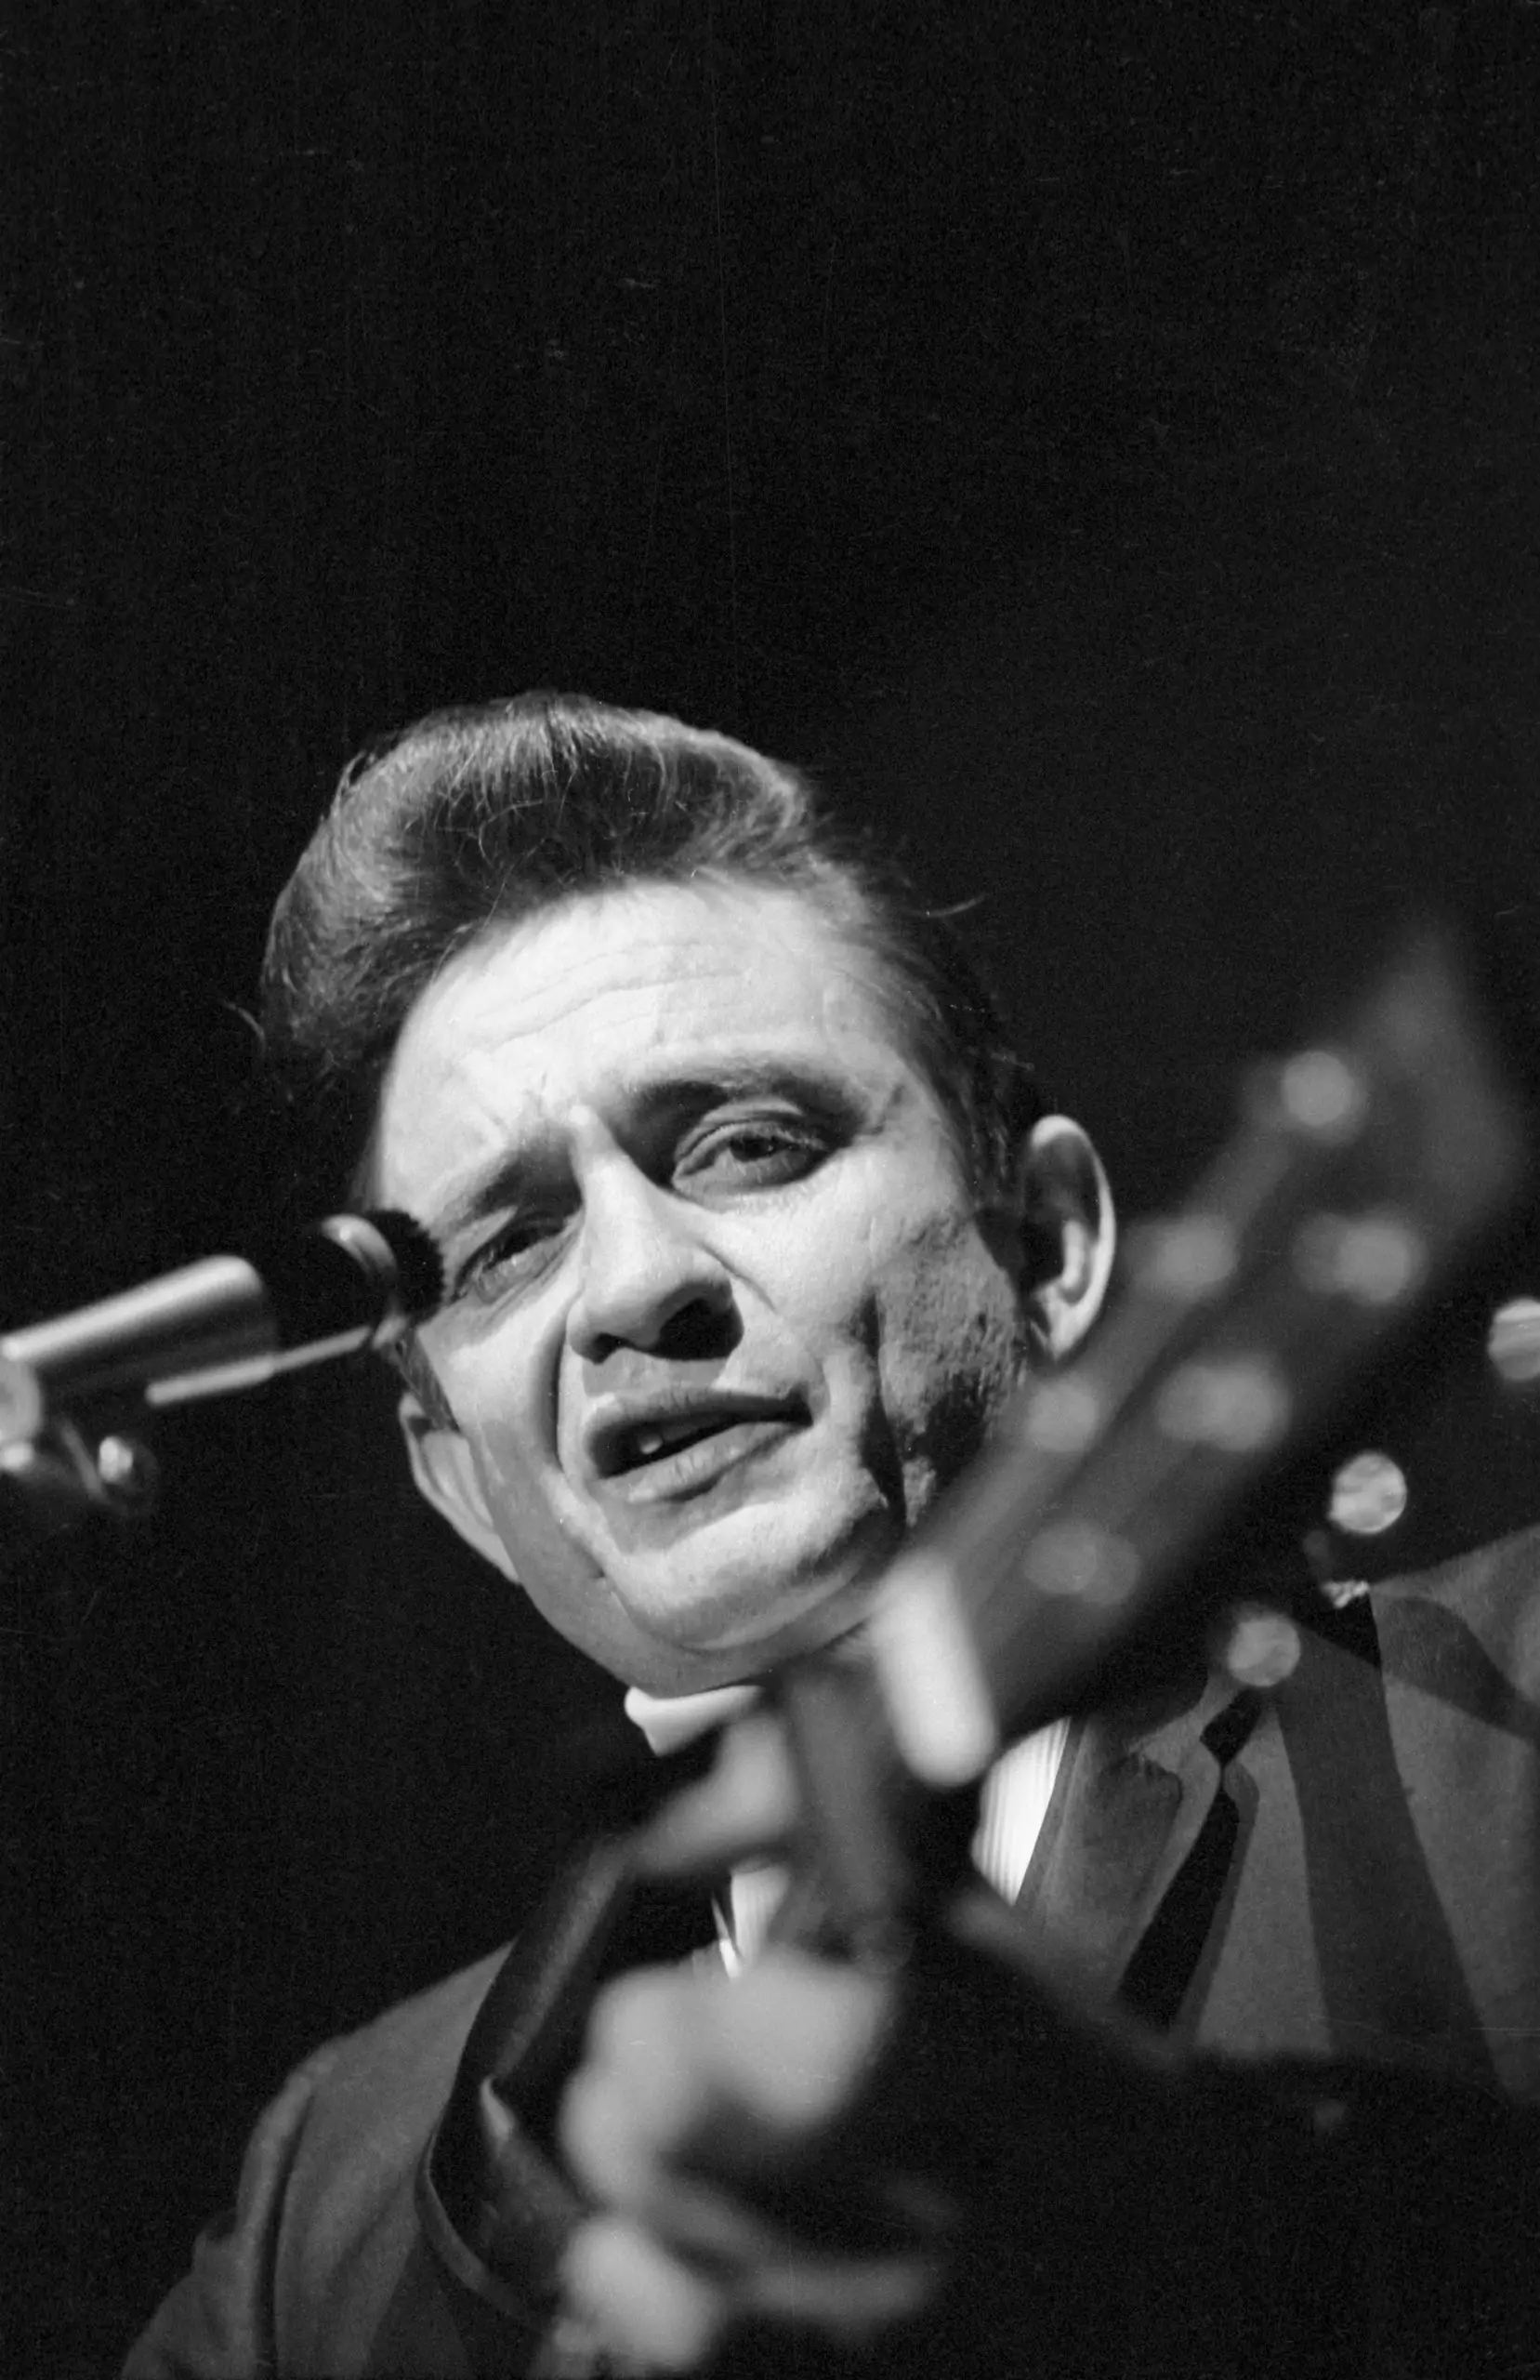 The Legendary Johnny Cash A Country Music Icon